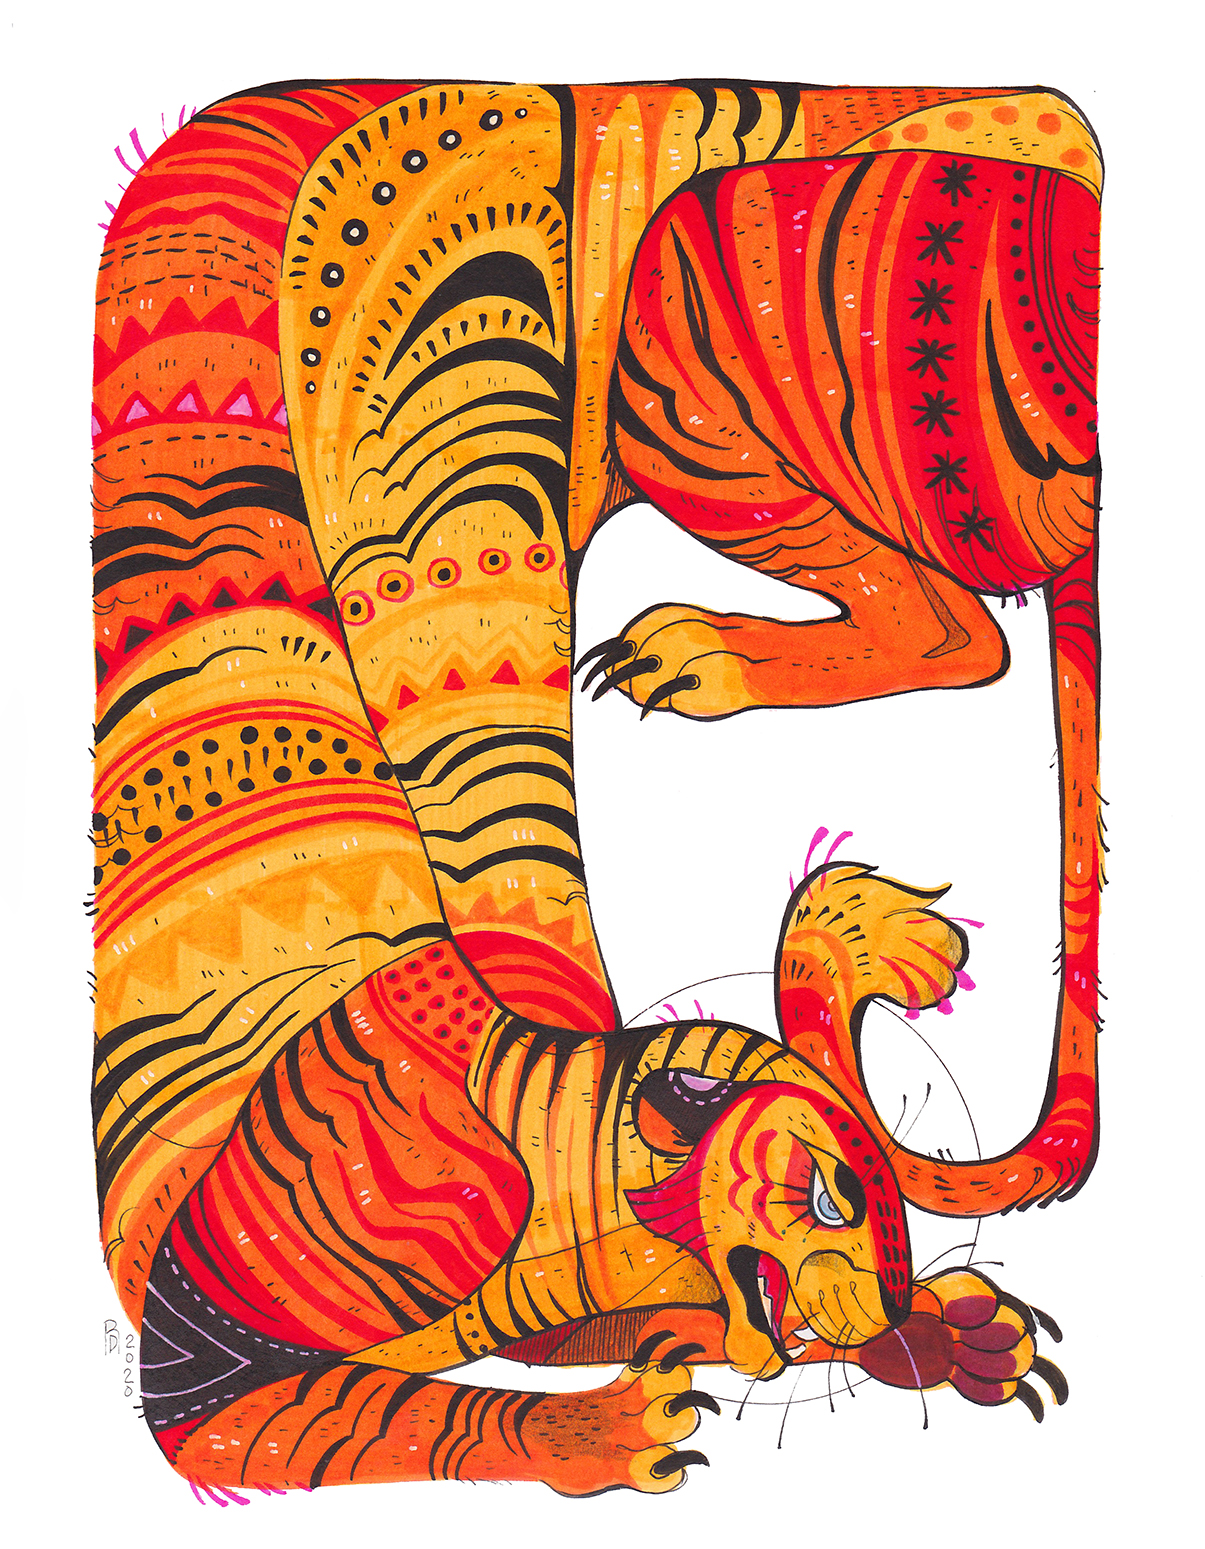 Red and yellow tiger – Traditional illustration